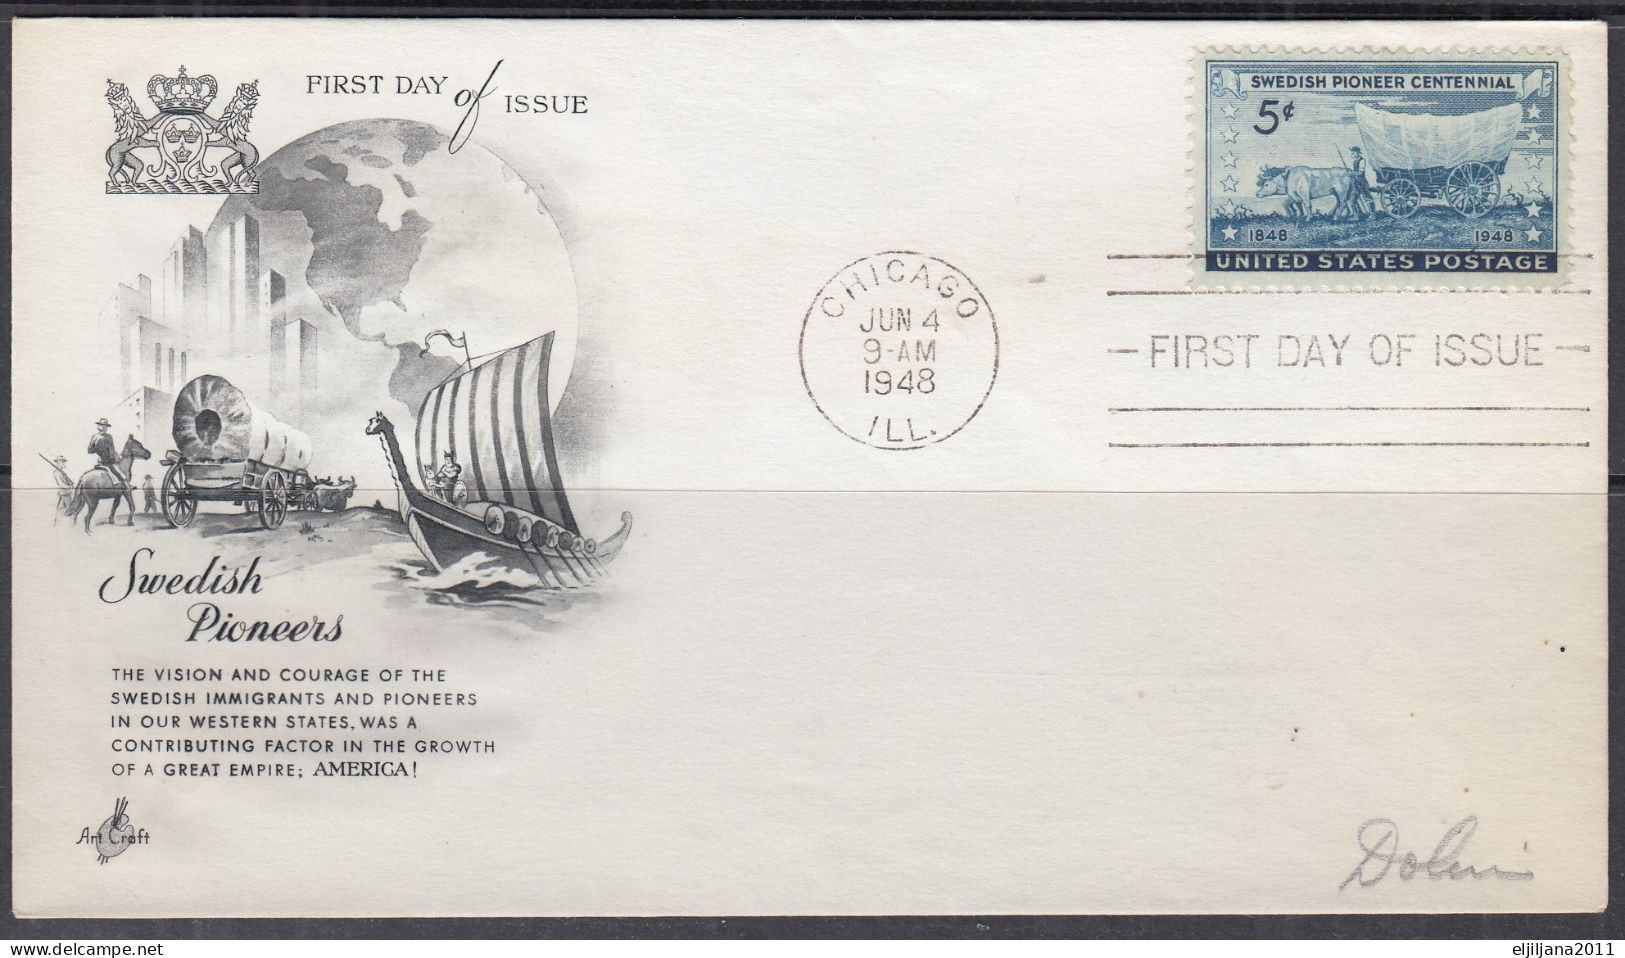 SALE !! 50 % OFF !! ⁕ USA 1948 Chicago ⁕ SWEDISH PIONEER Centennial 3c. ⁕ FDC Cover - 1941-1950